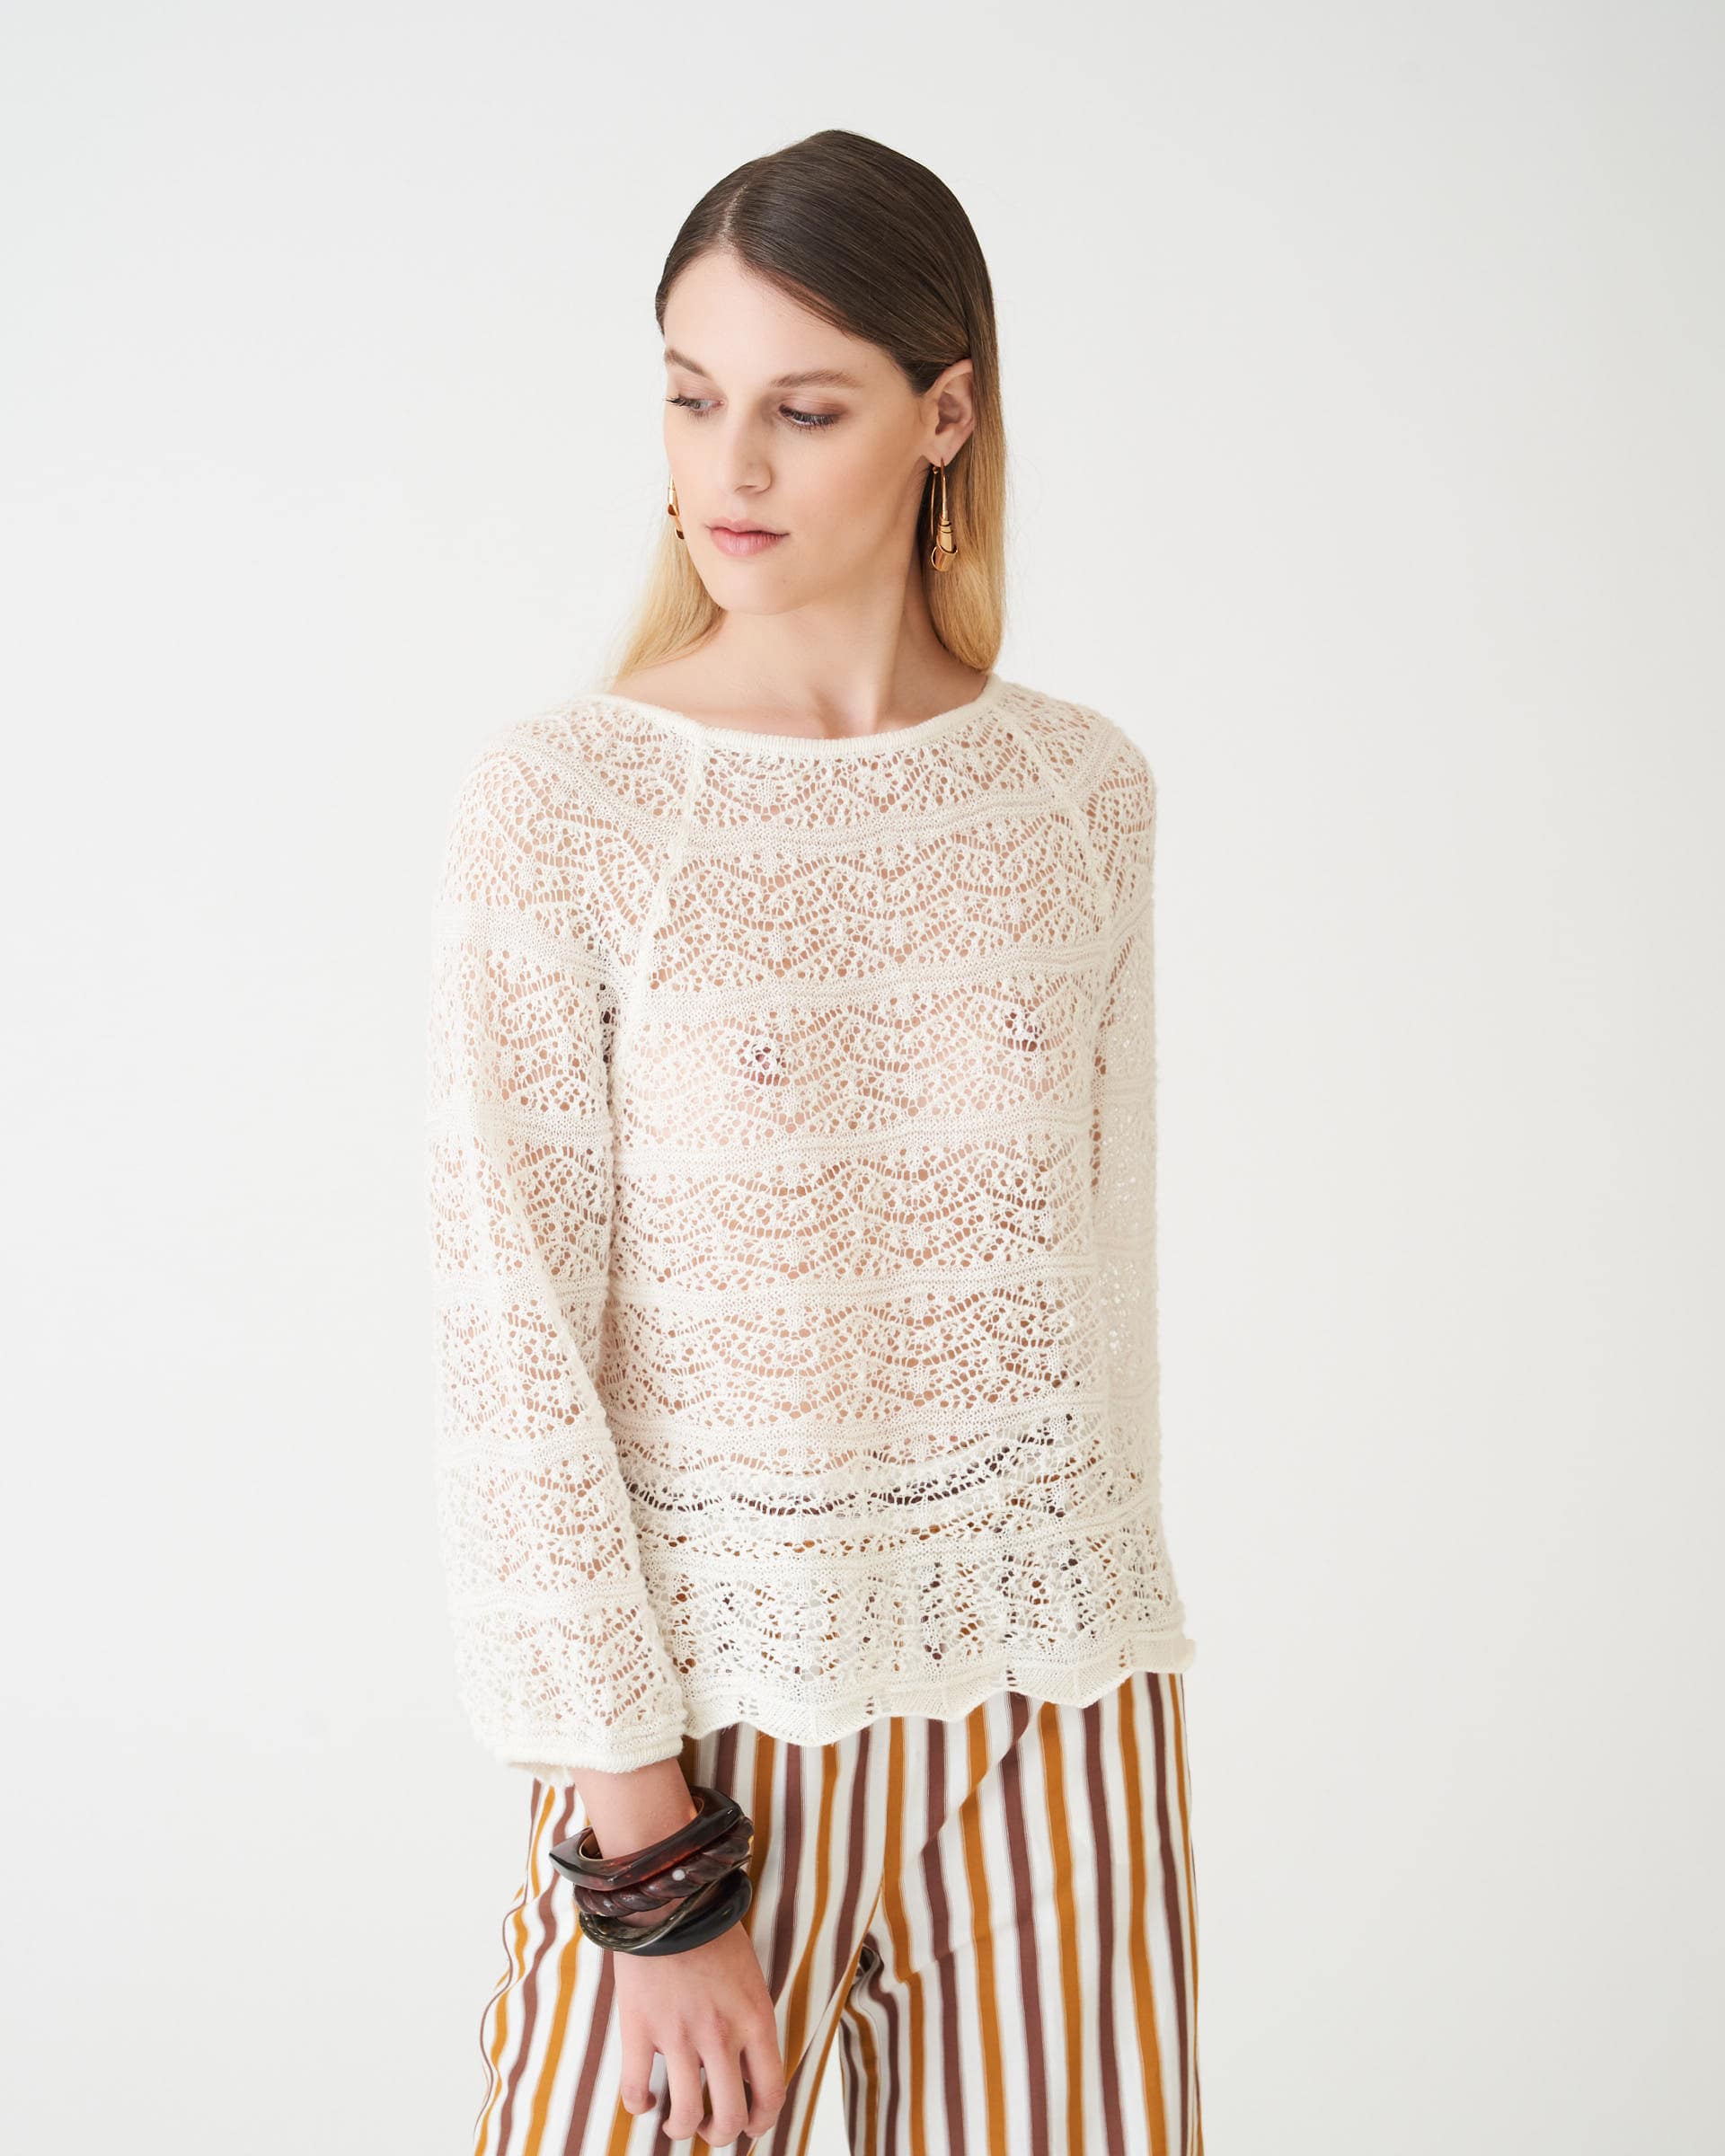 The Market Store | Perforated Sweater